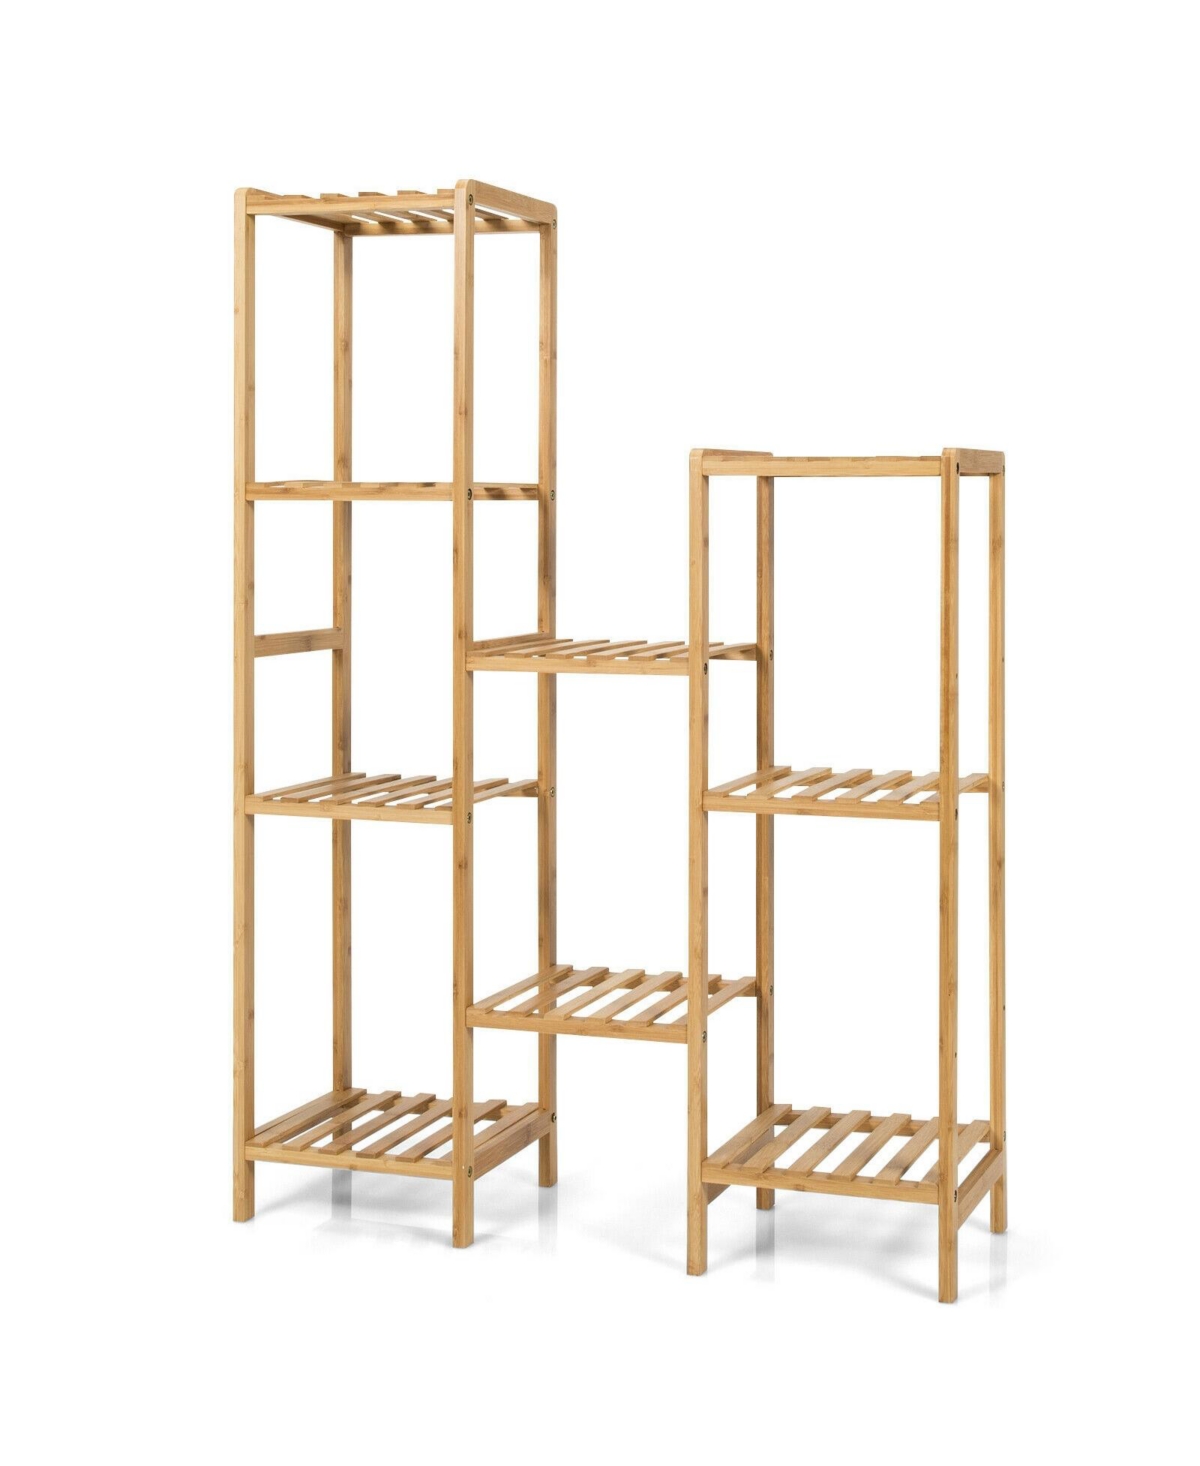 9-Tier Bamboo Plant Stand for Living Room Balcony Garden